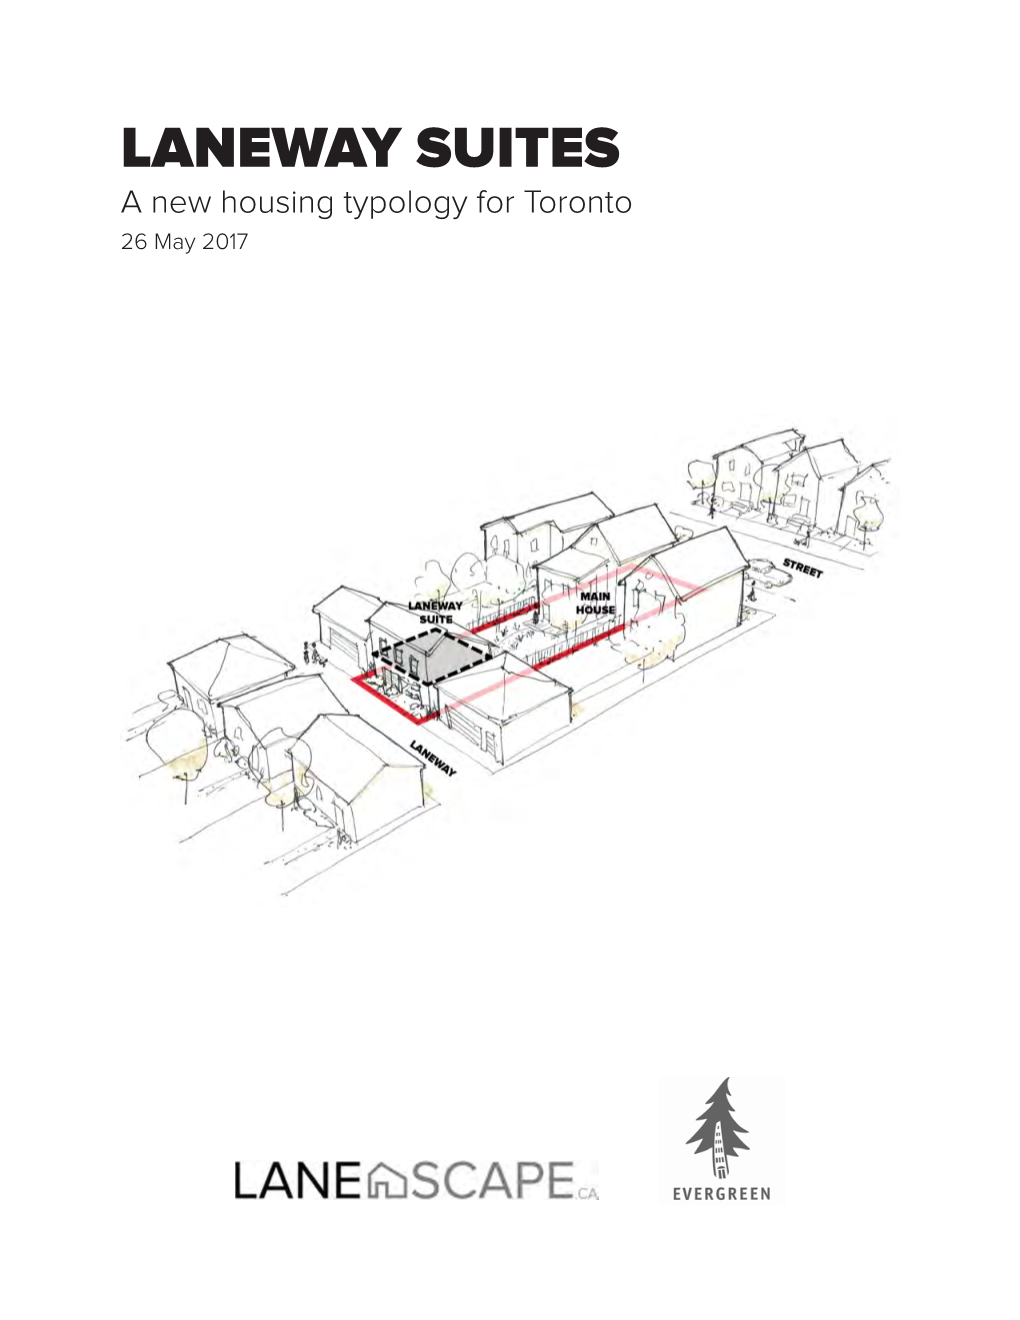 LANEWAY SUITES a New Housing Typology for Toronto 26 May 2017 LANEWAY SUITES, AS PROPOSED in THIS REPORT, ARE DEFINED AS DETACHED SECONDARY SUITES